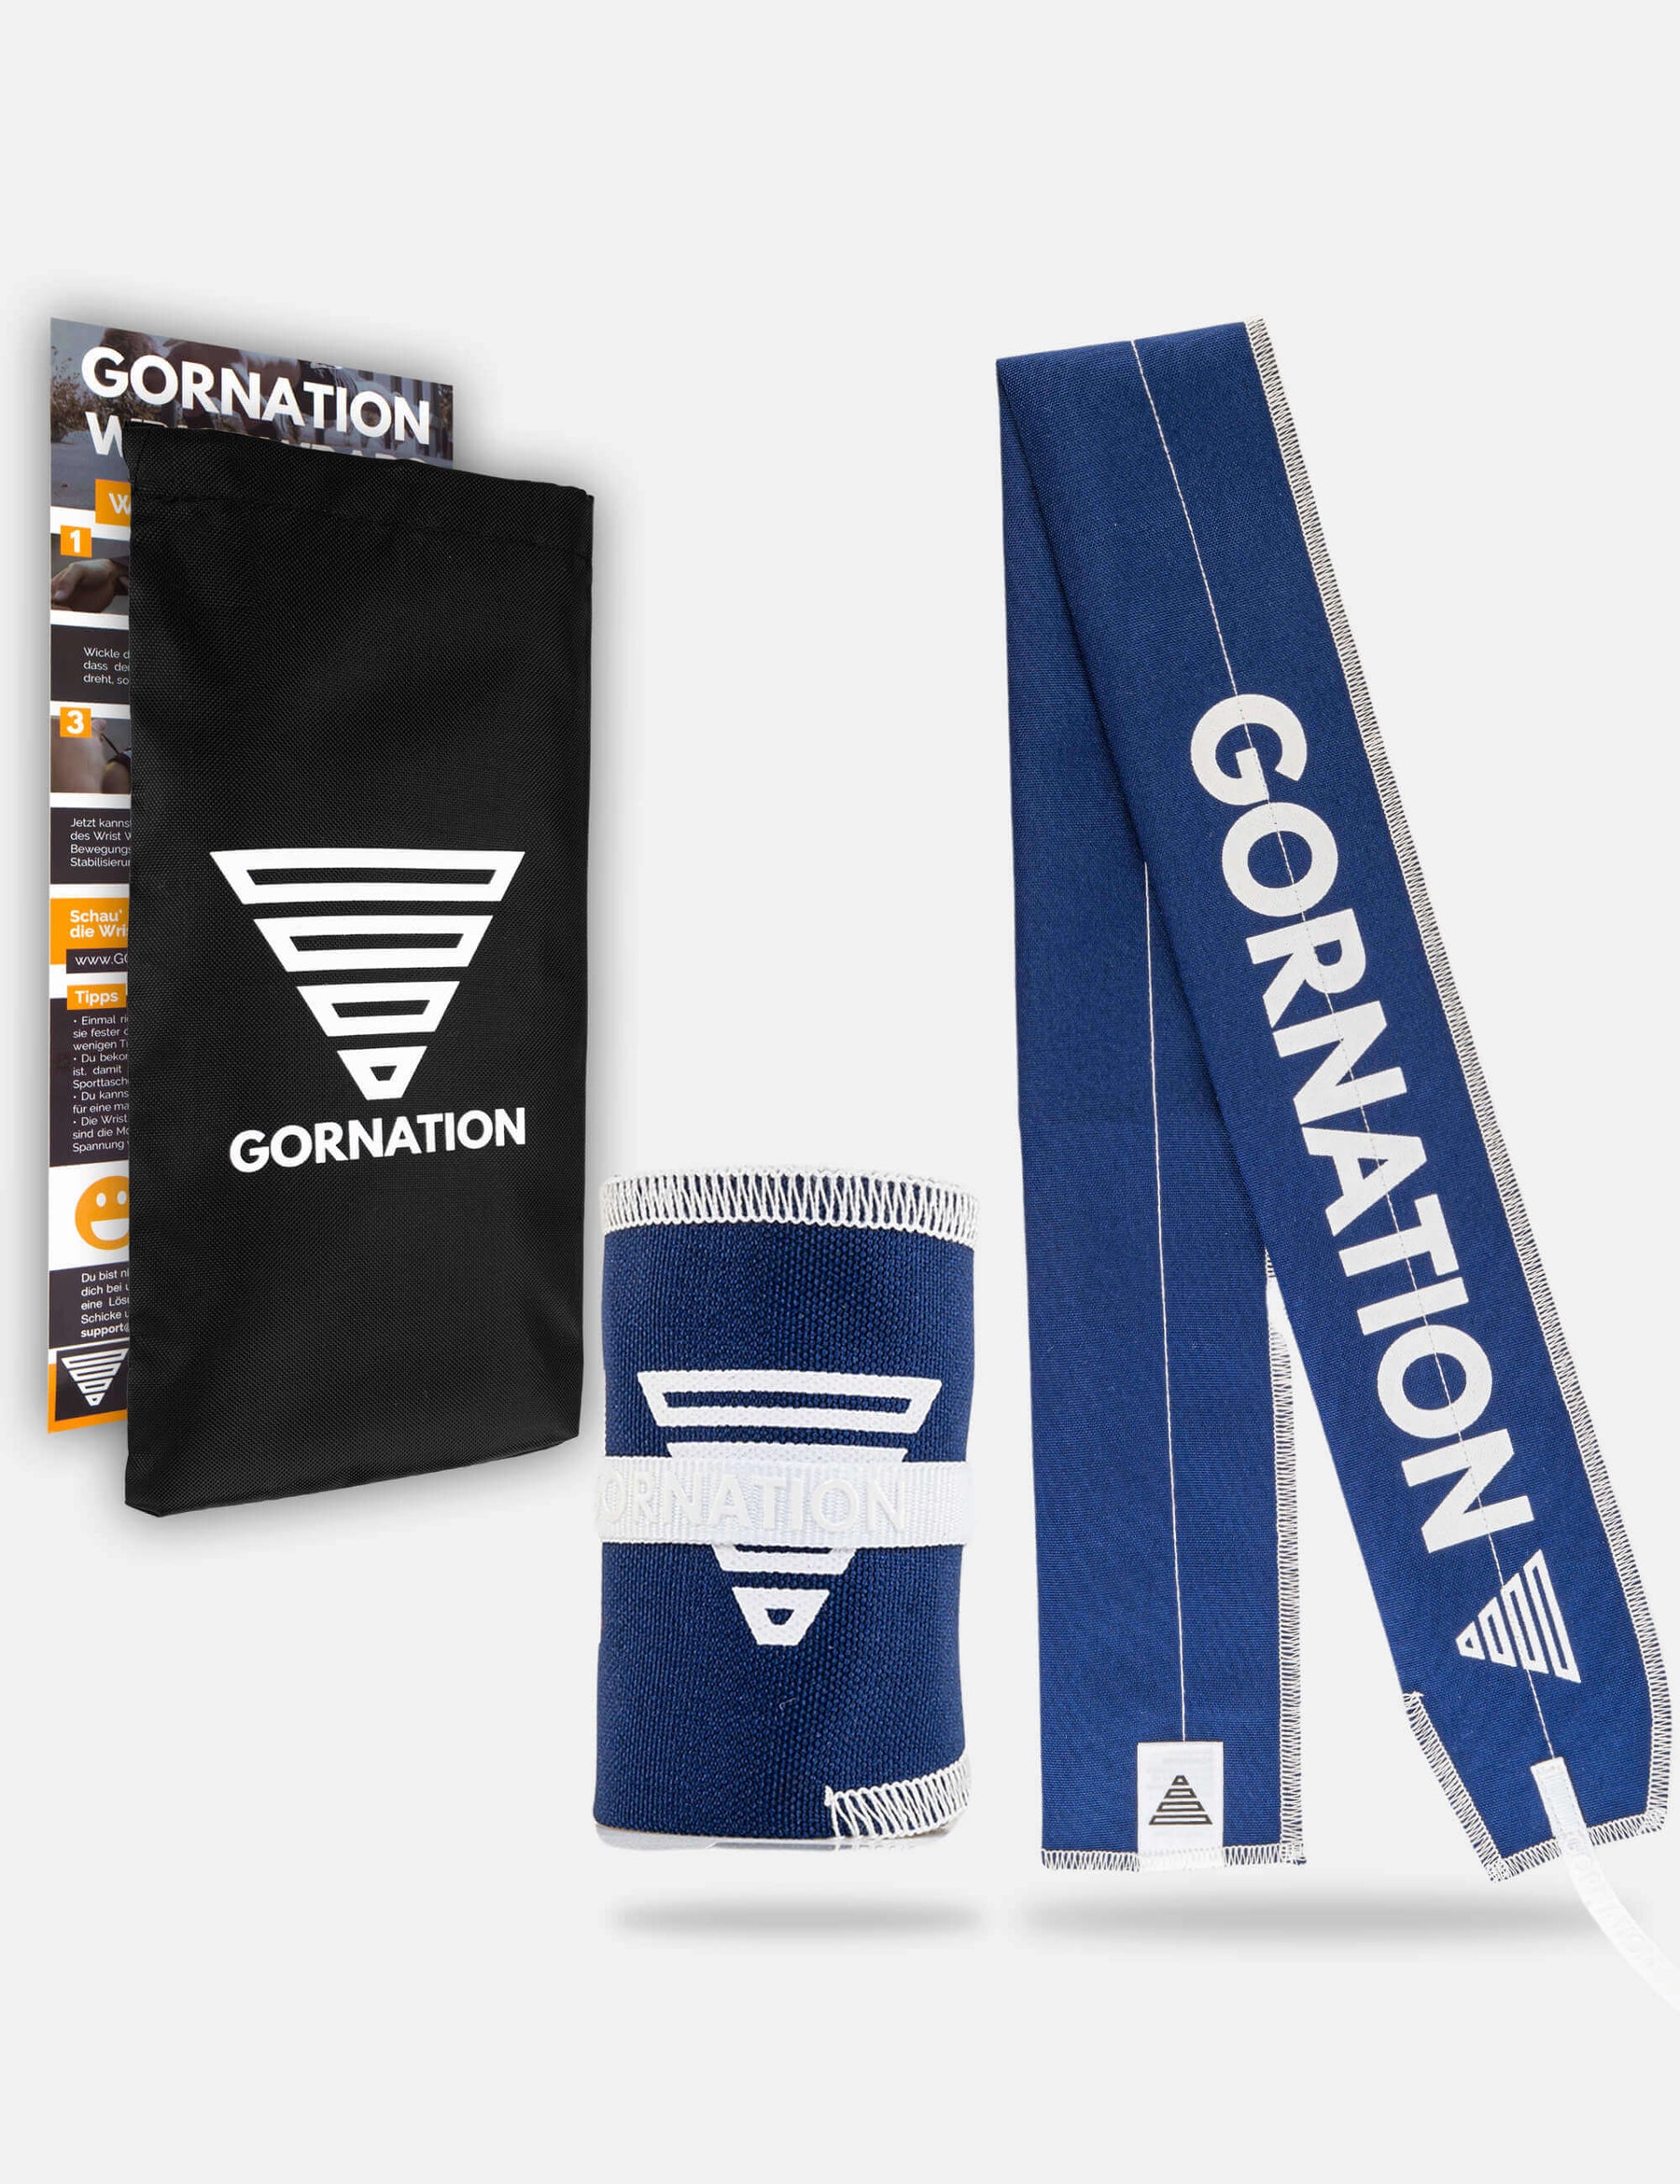 Navy wrist wrap from Gornation for extra stability and injury prevention. And black cary bag.